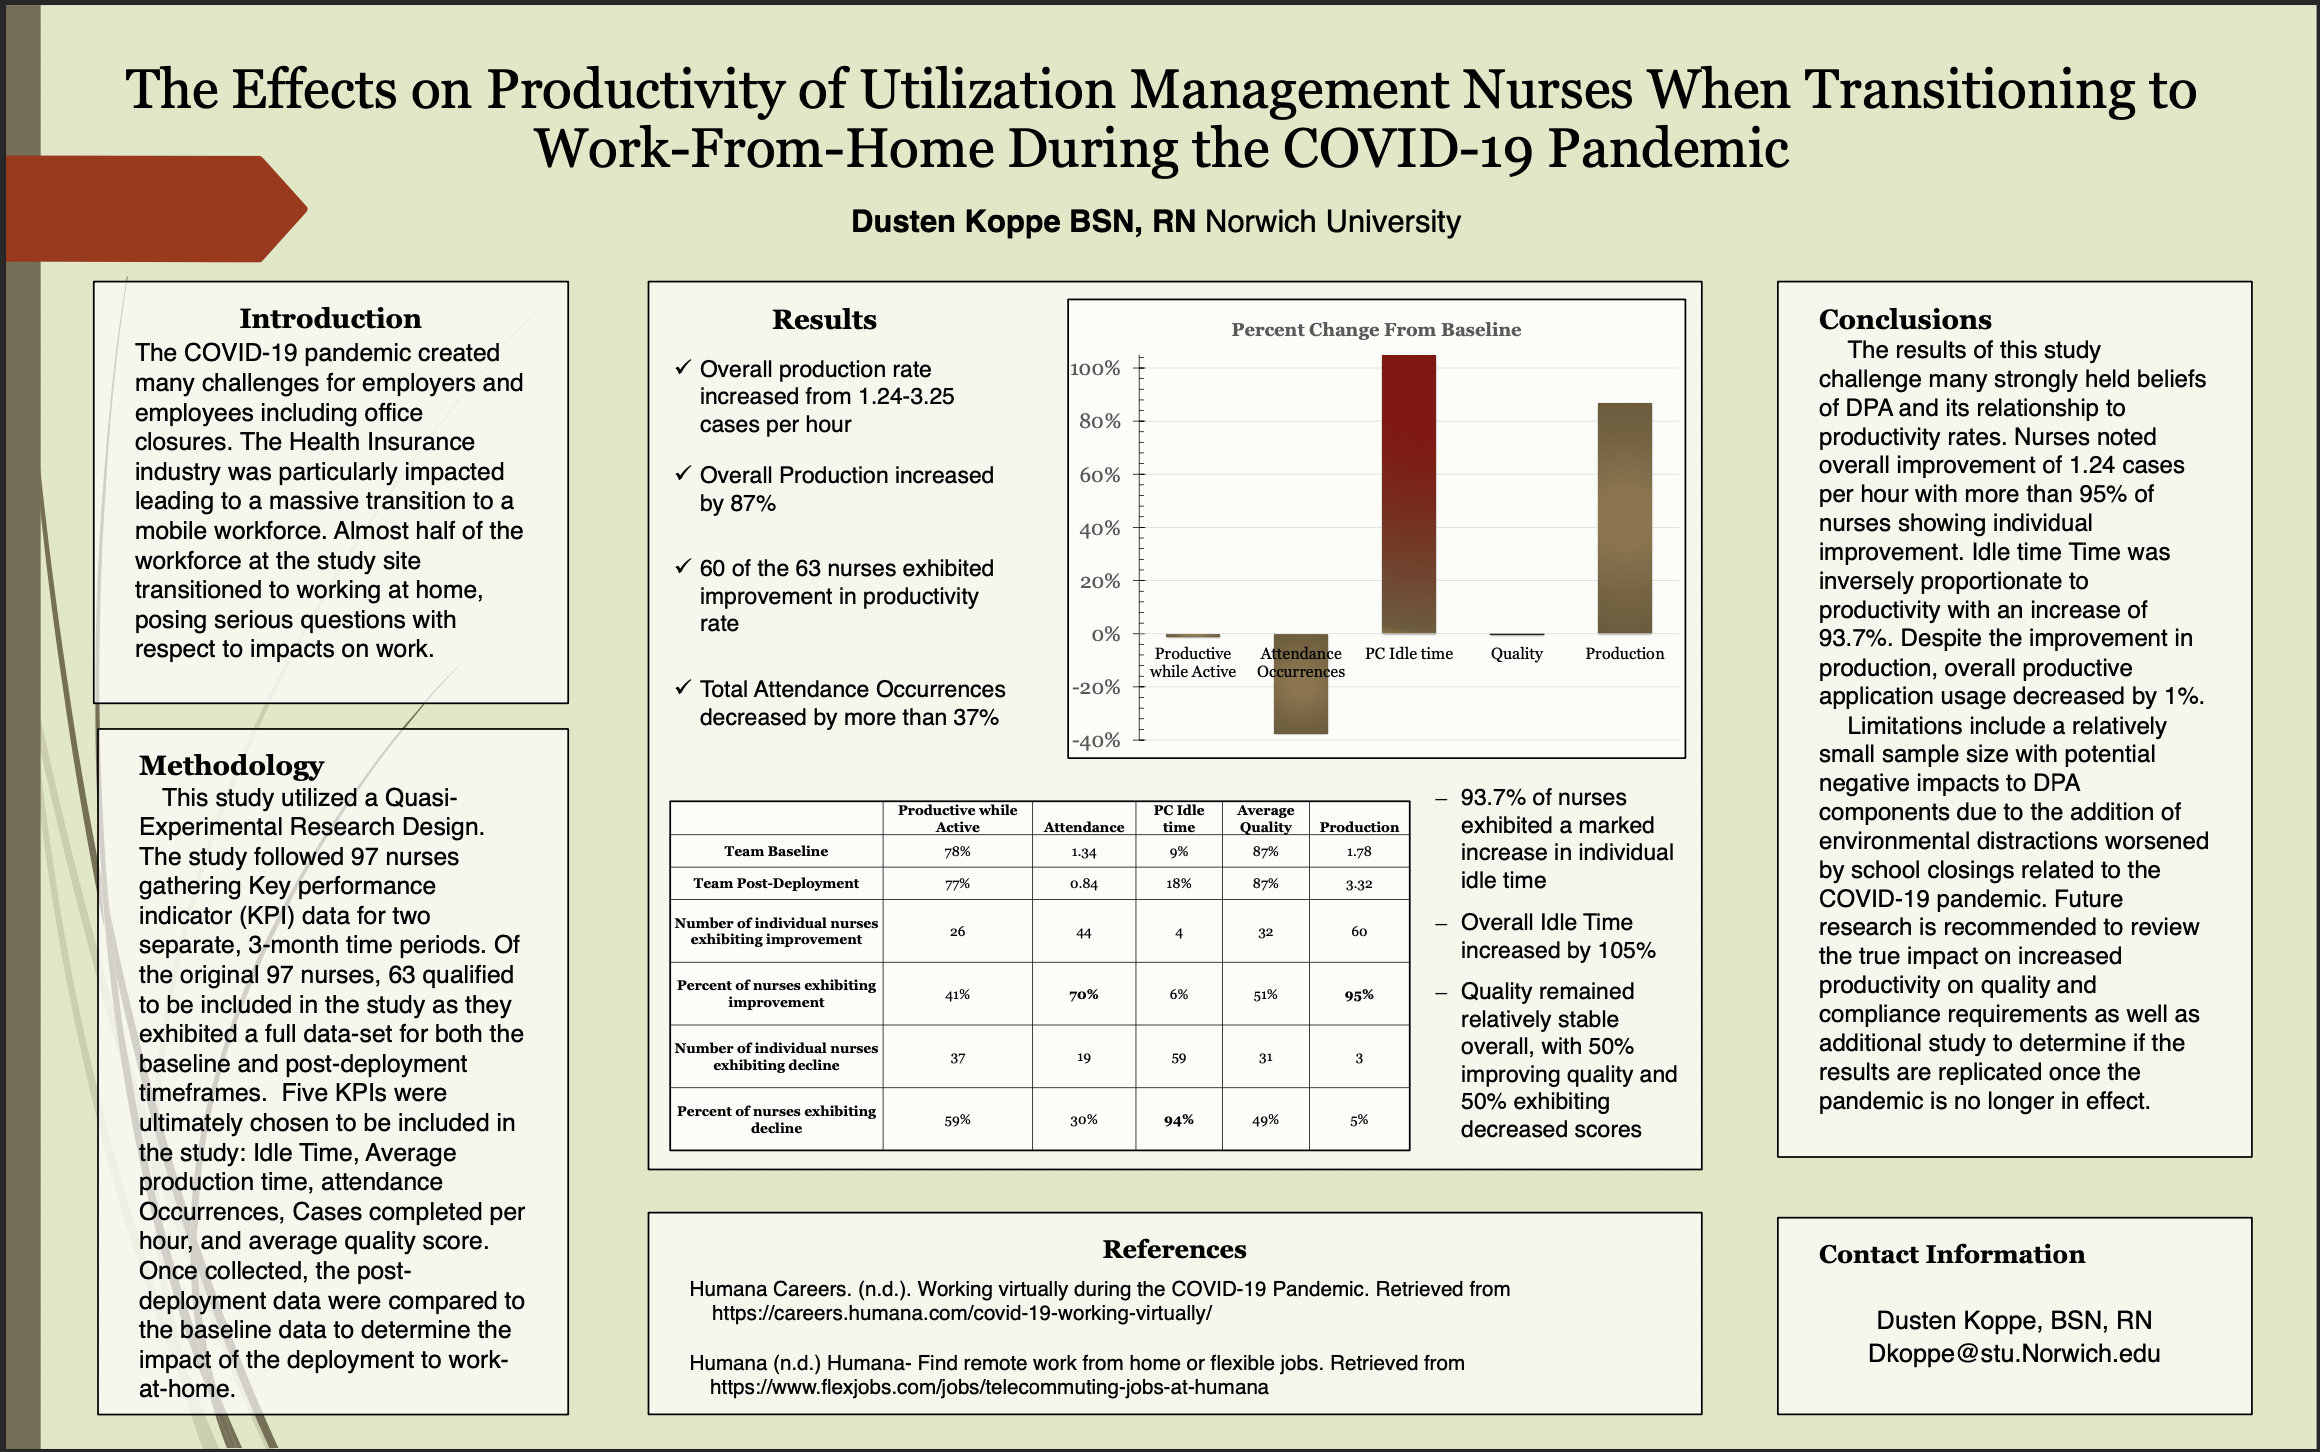 Showcase Image for The Effects on Productivity of Utilization Management Nurses When Transitioning to Work-at-Home During the COVID-19 Pandemic